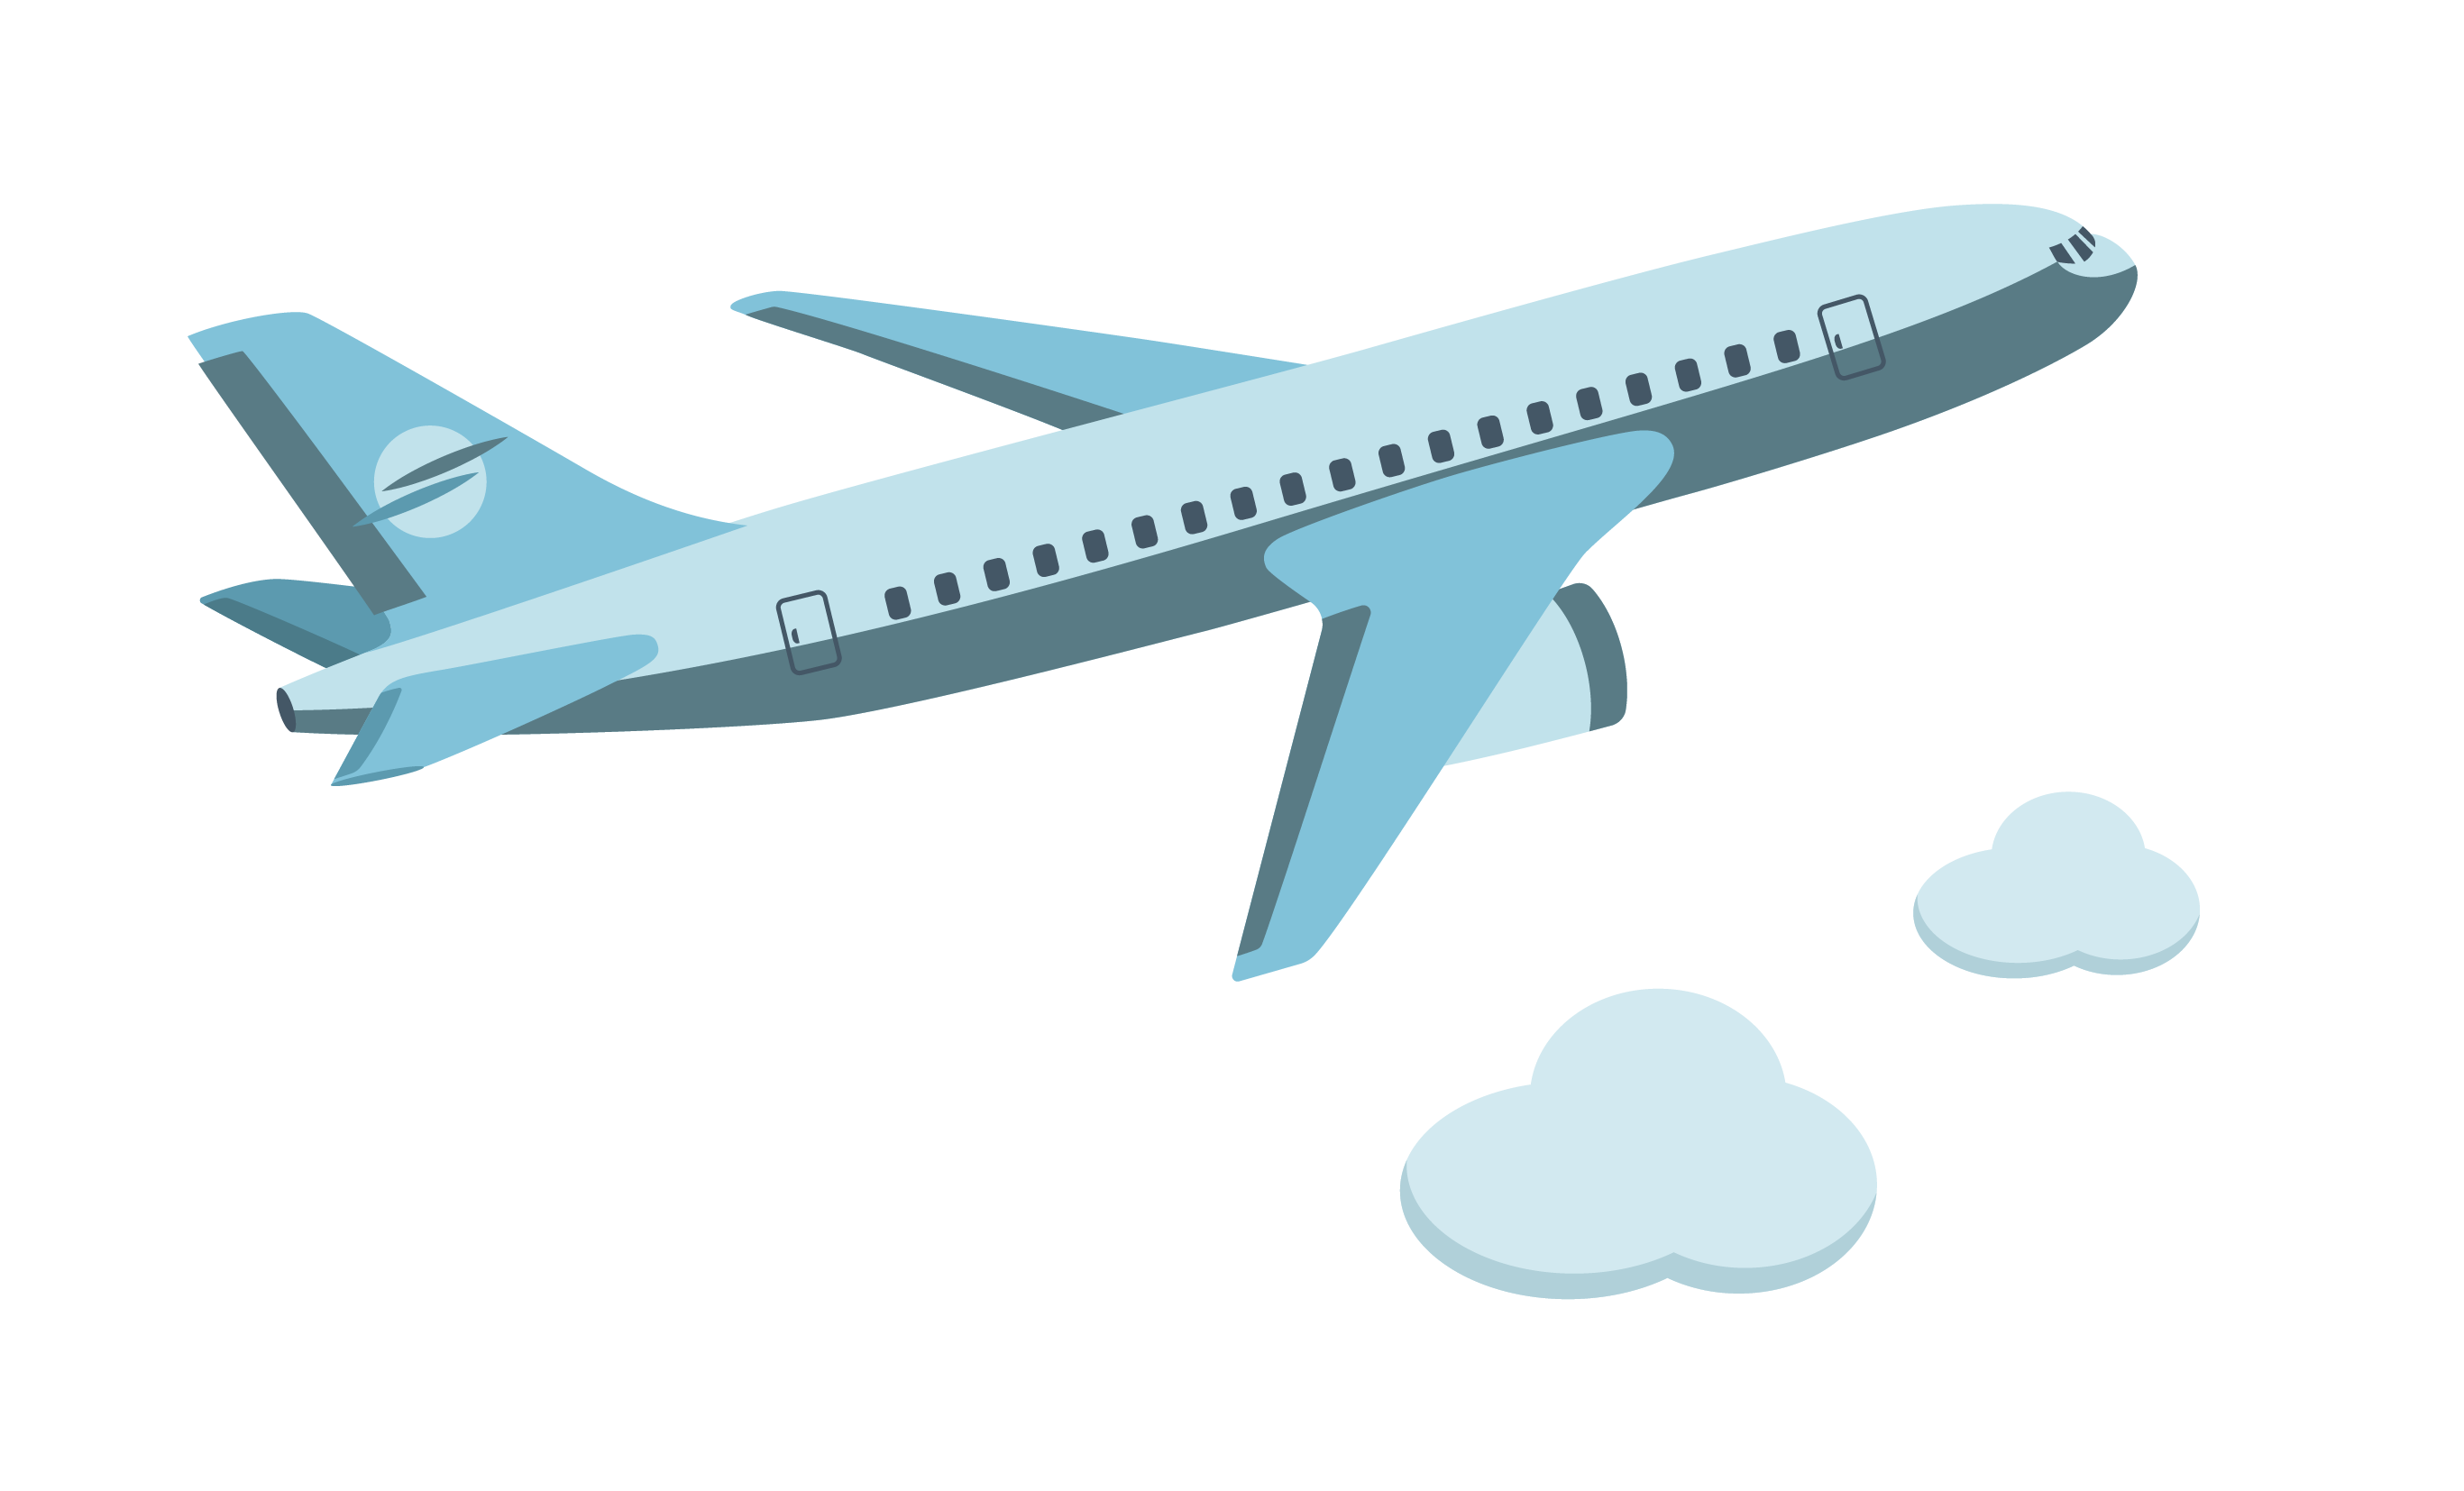 The Flying Plane Aircraft Vector In Airplane Clipart